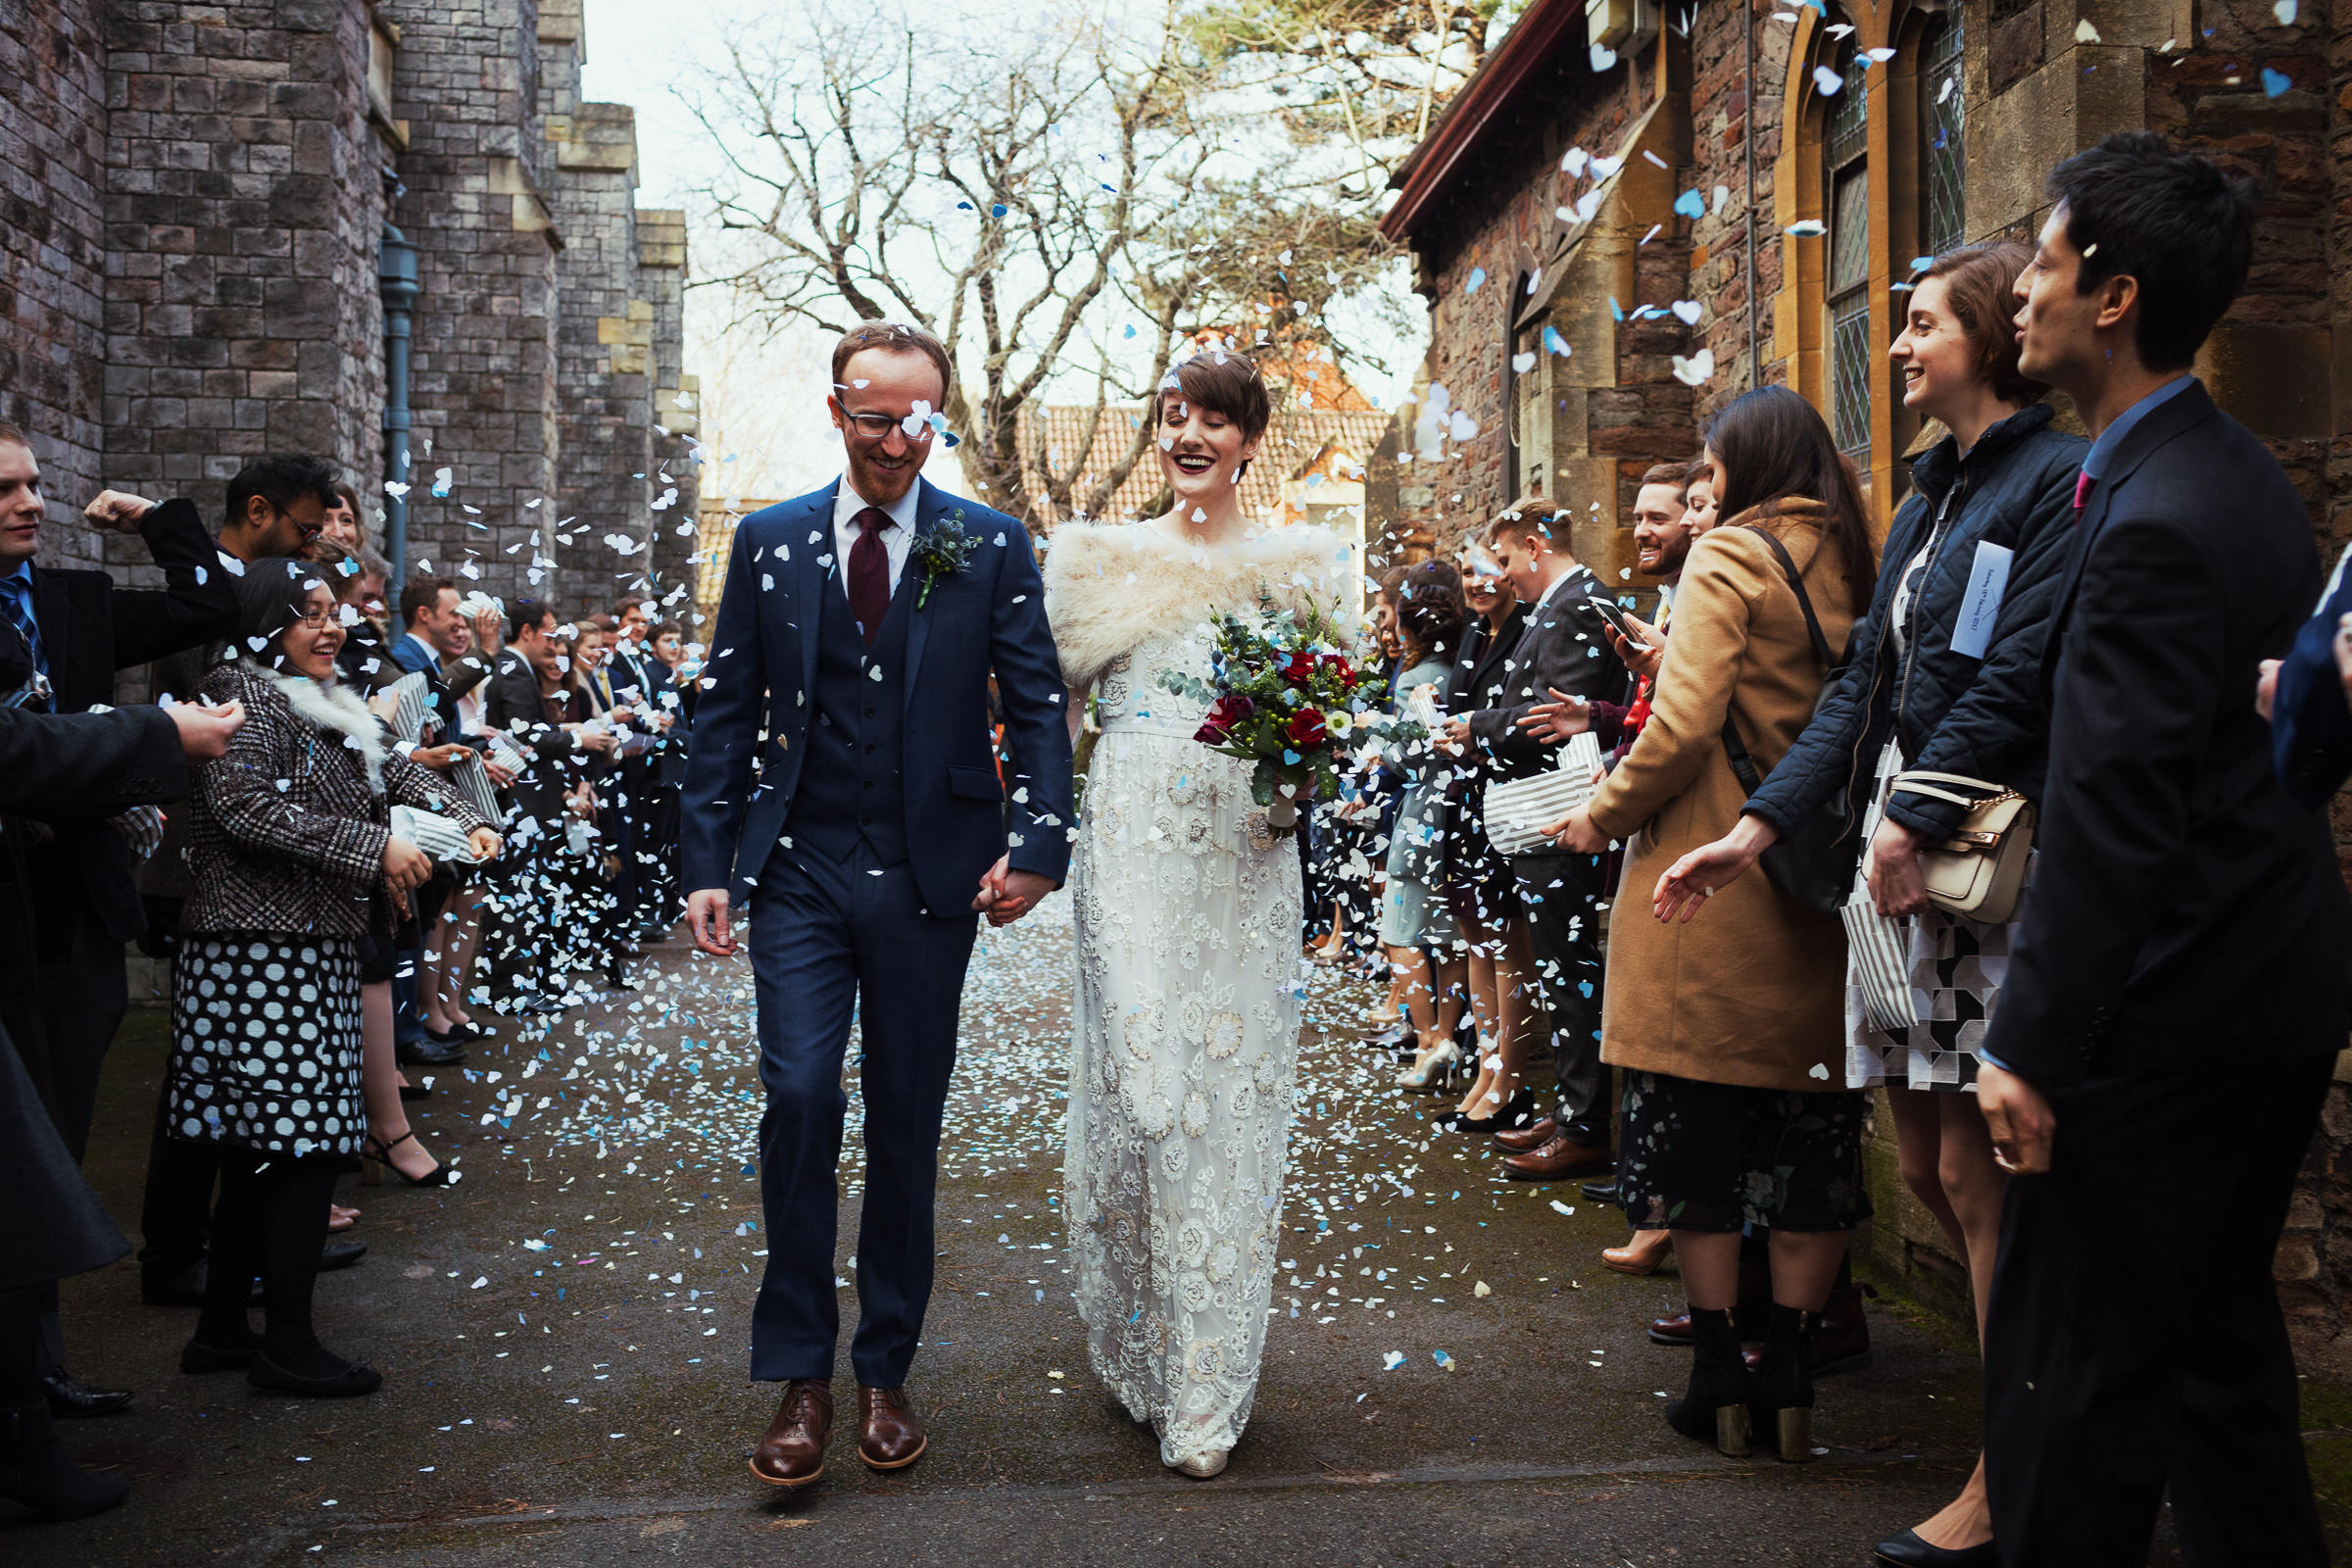 Confetti hearts falling on a man and woman after their wedding ceremony at St Alban's Church of Westbury Park Bristol wedding. The guests are wearing coats.